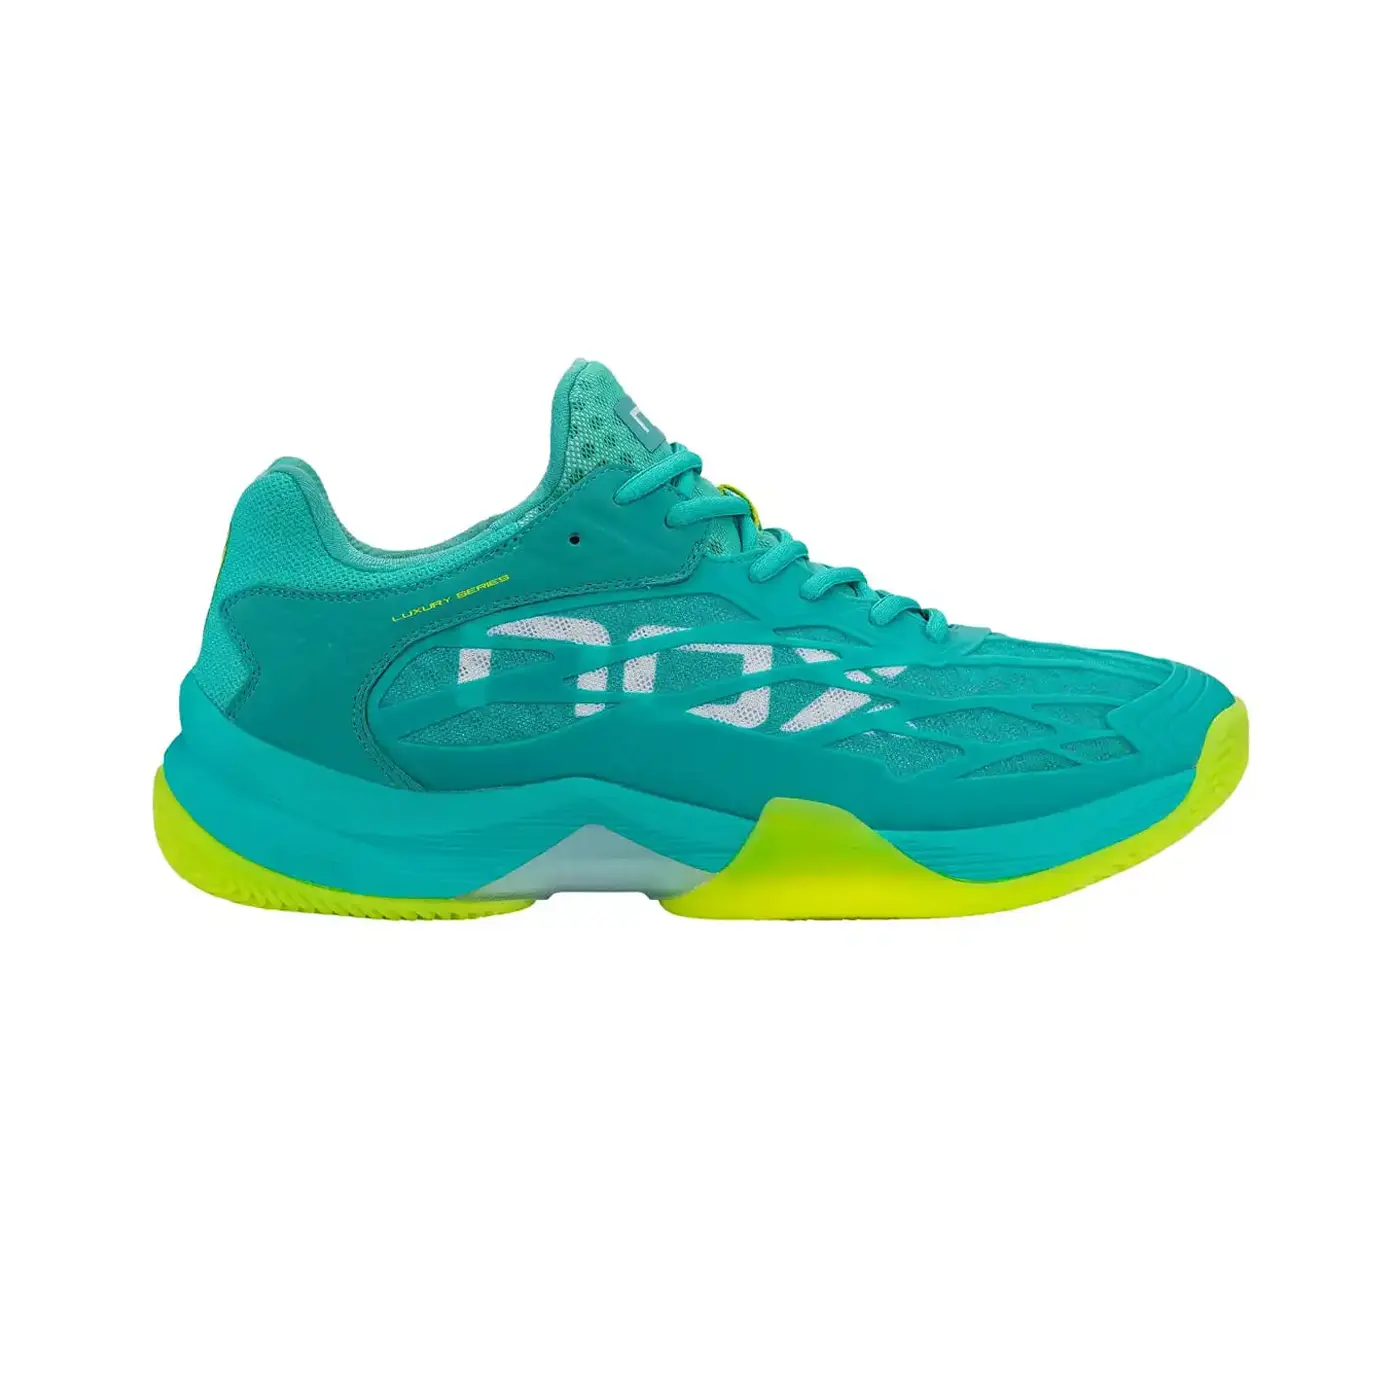 NOX AT10 LUX TurquoiseLime Padel Shoes Image 1